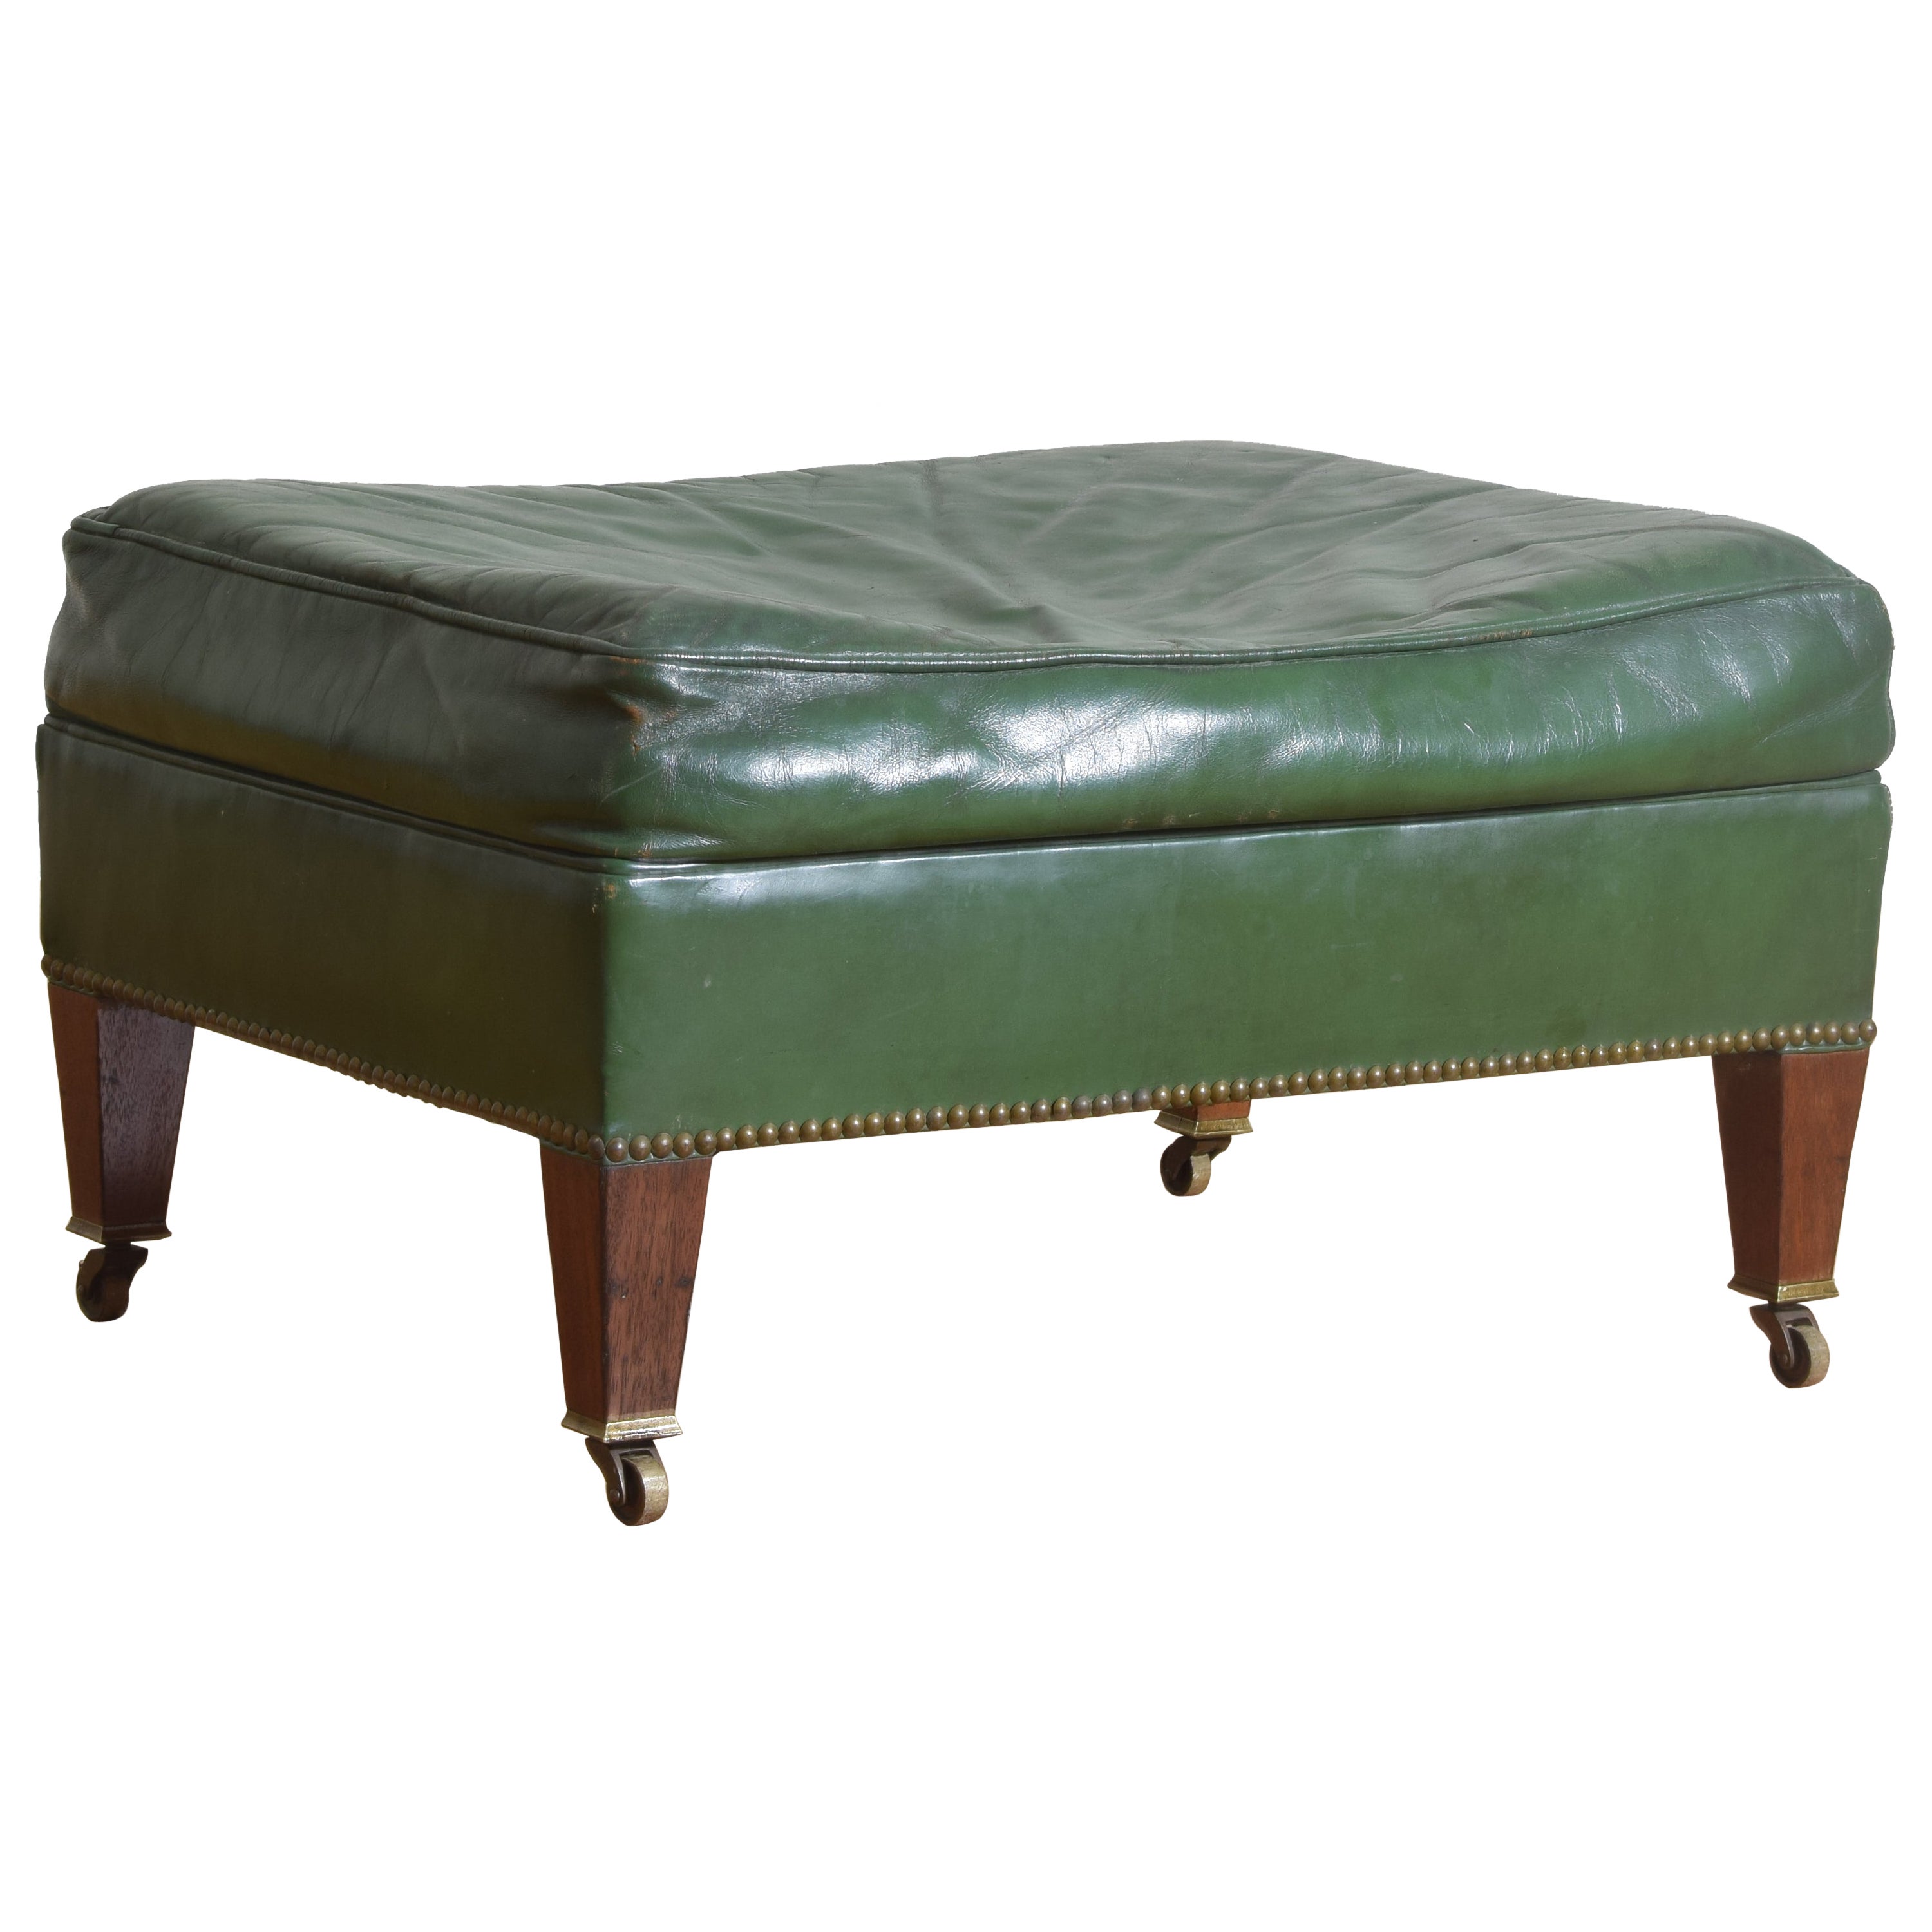 English Regency Style Mahogany and Leather Upholstered Bench, 2ndq 20th cen. For Sale